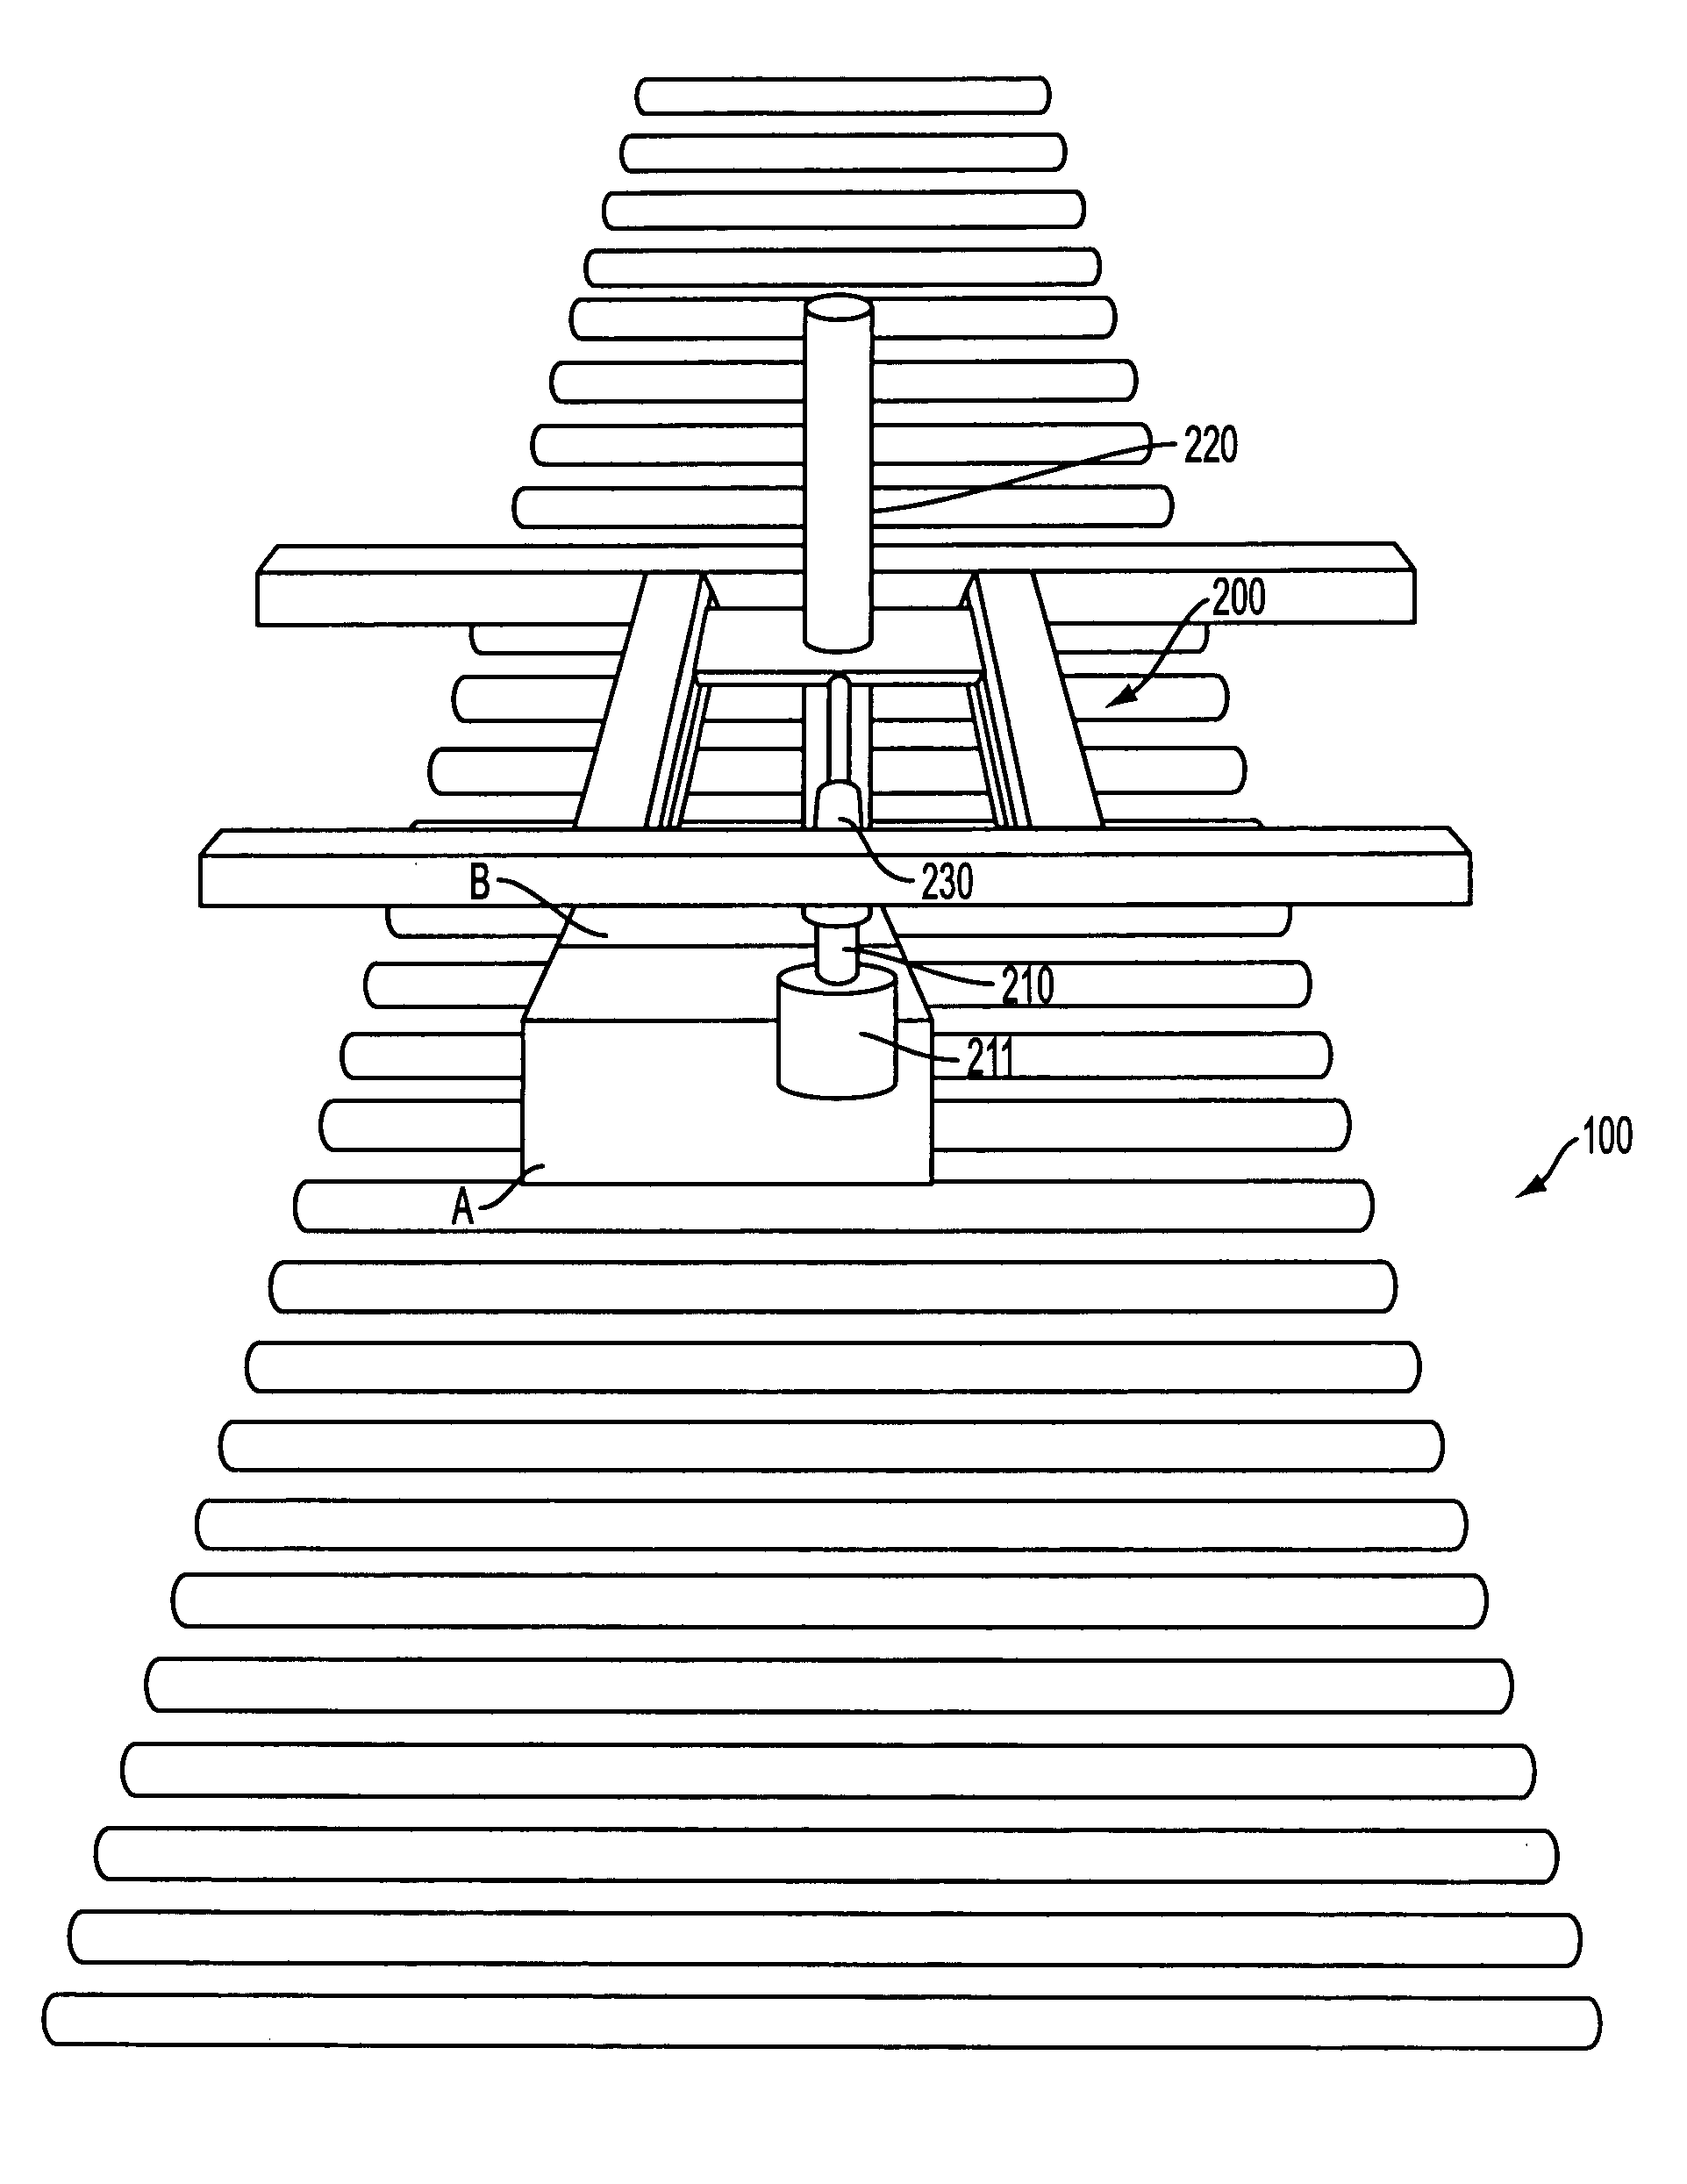 Case turning apparatus and method for a palletizer